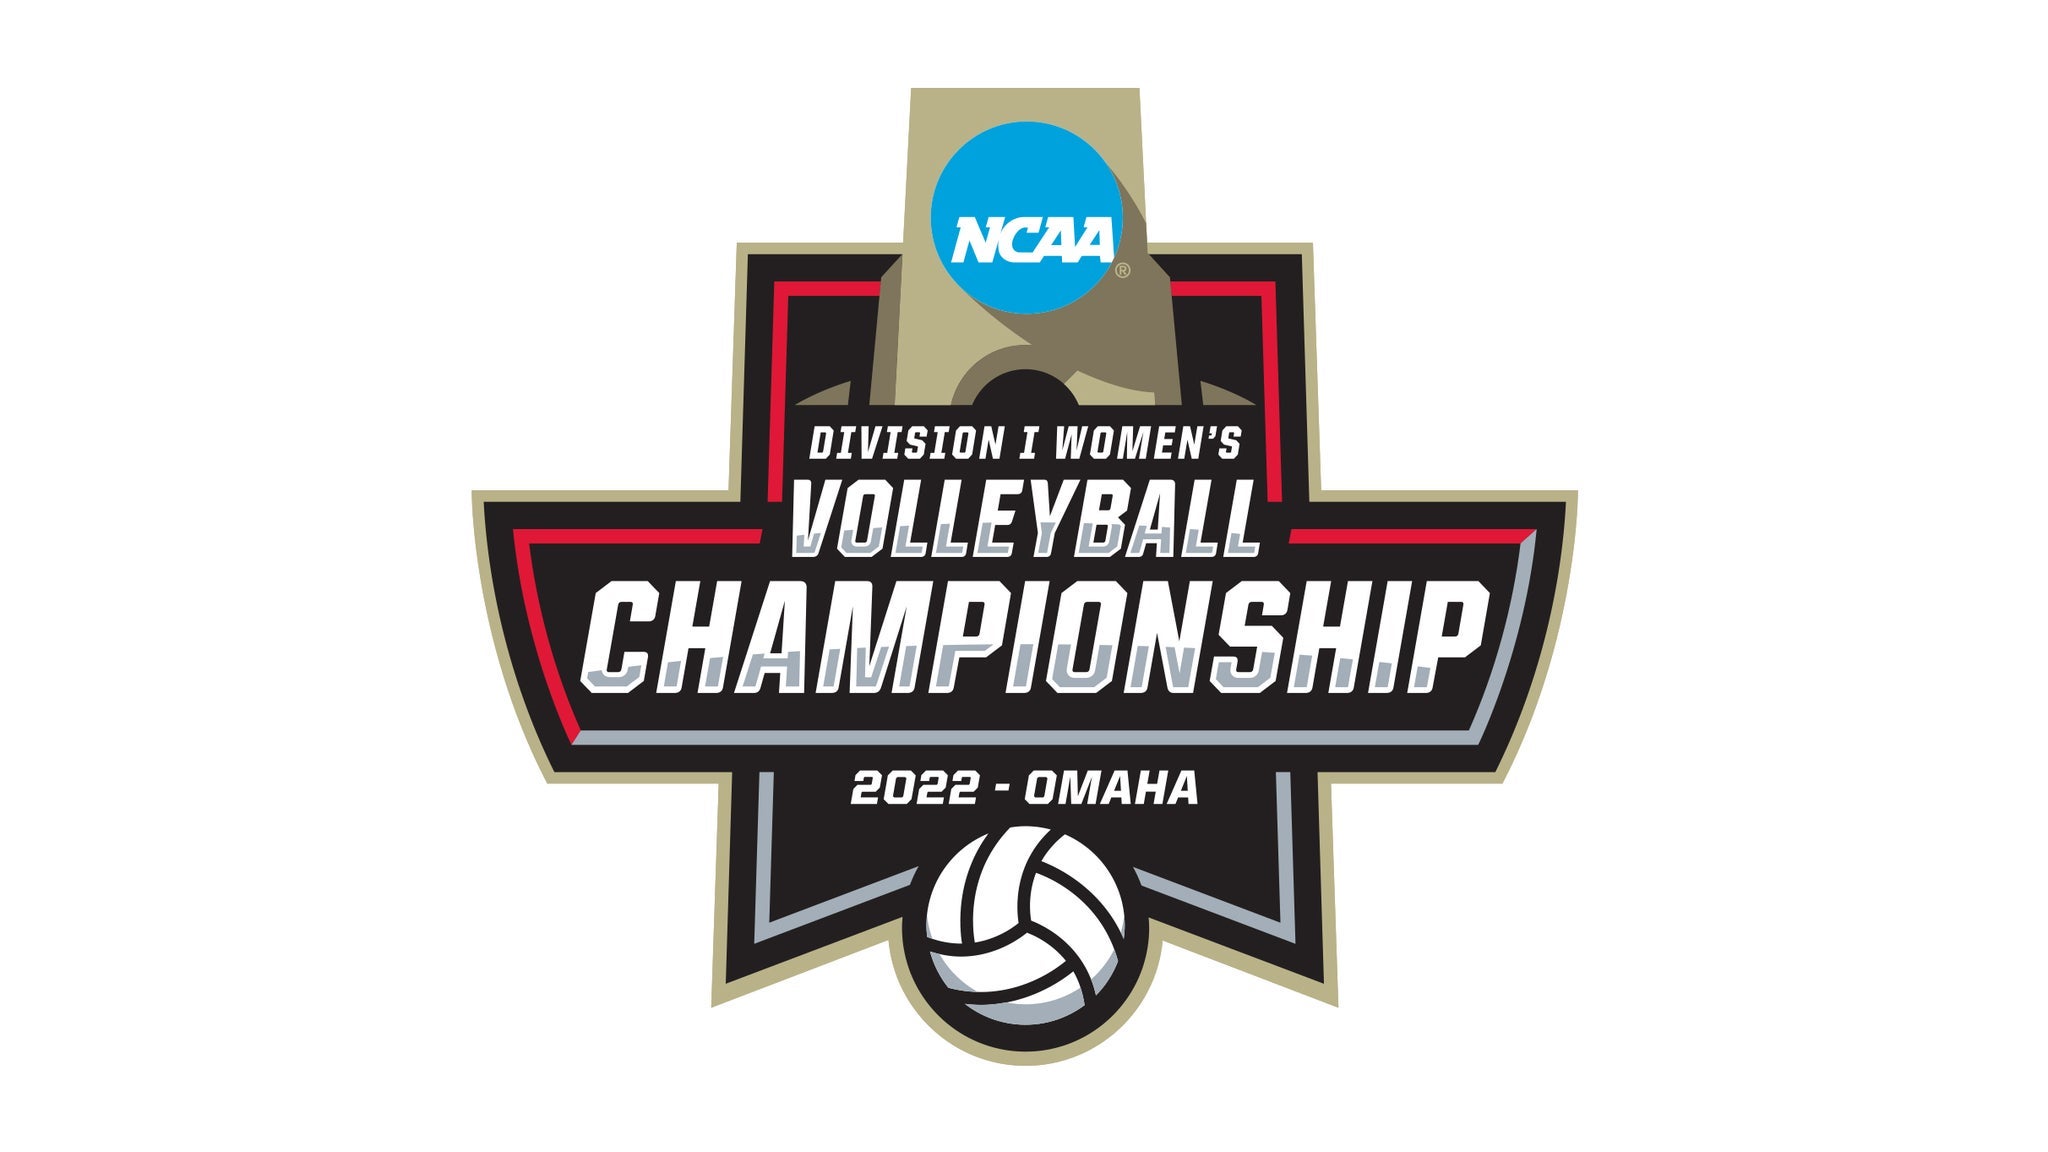 NCAA Division I Women's Volleyball Championship National Semi-Finals